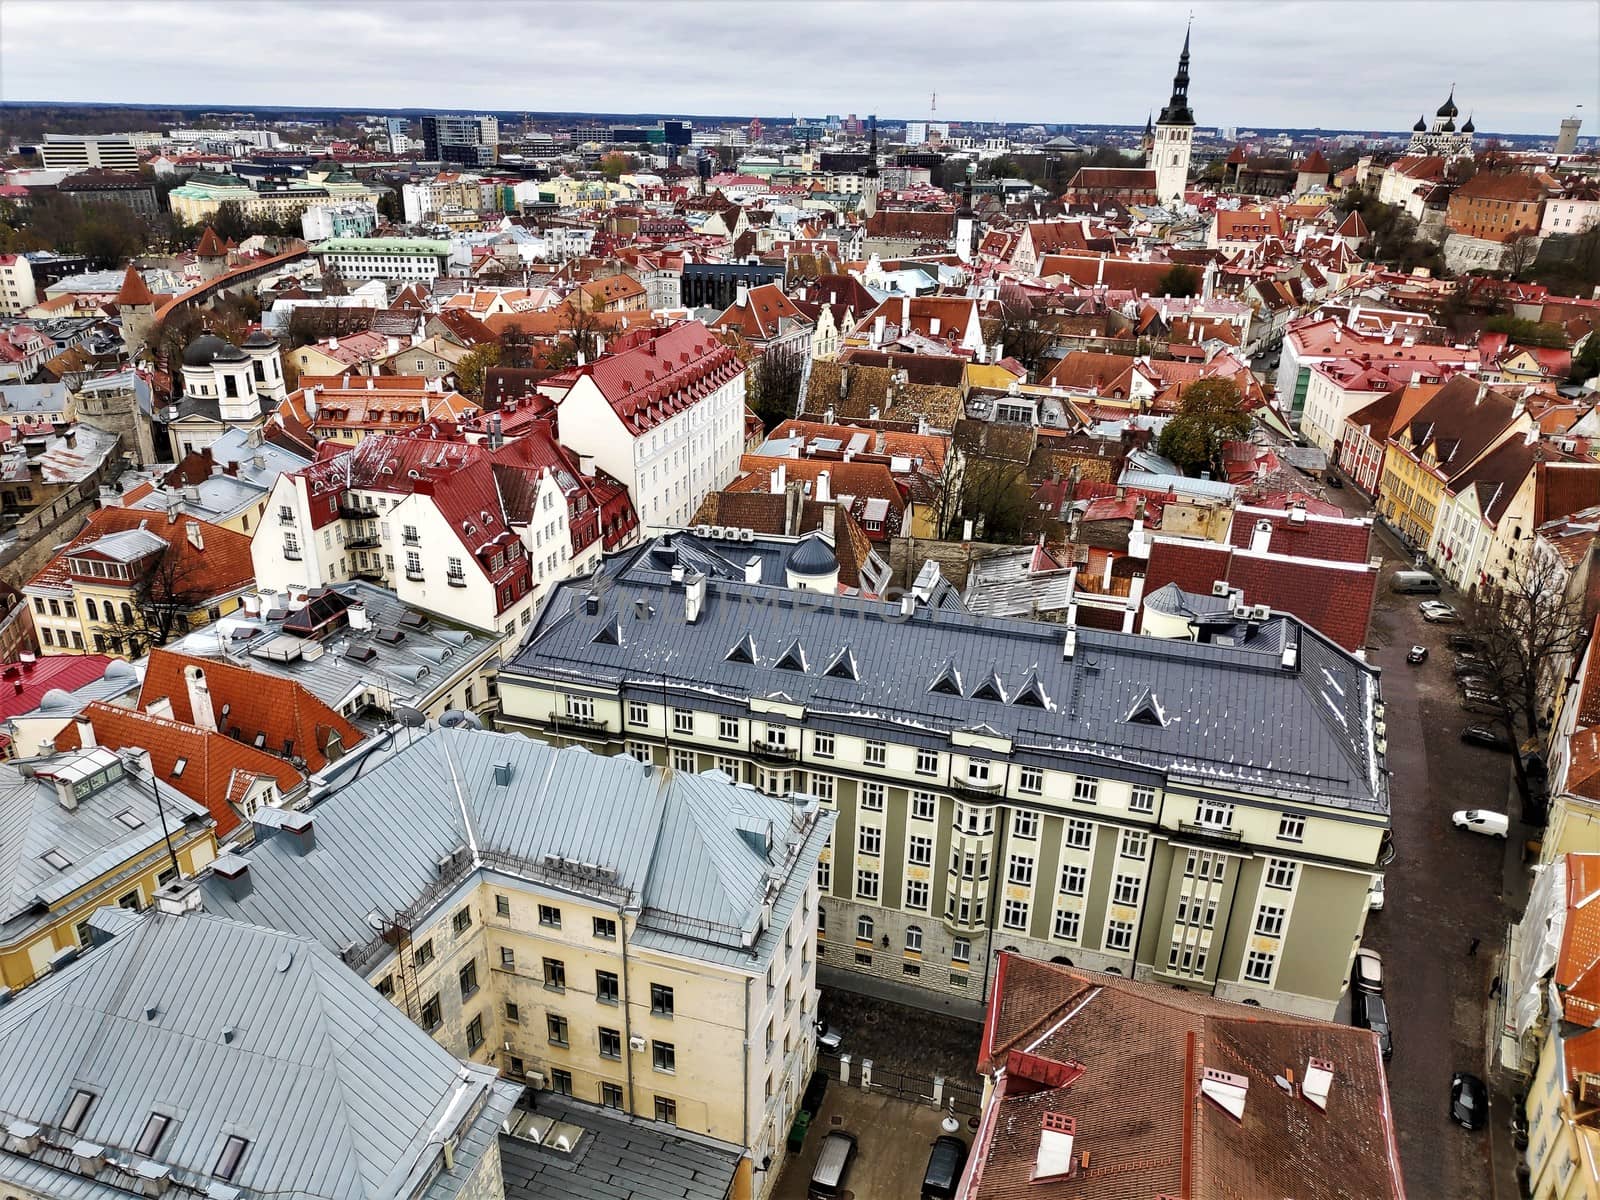 Panoramic view over the old town of Tallinn by pisces2386